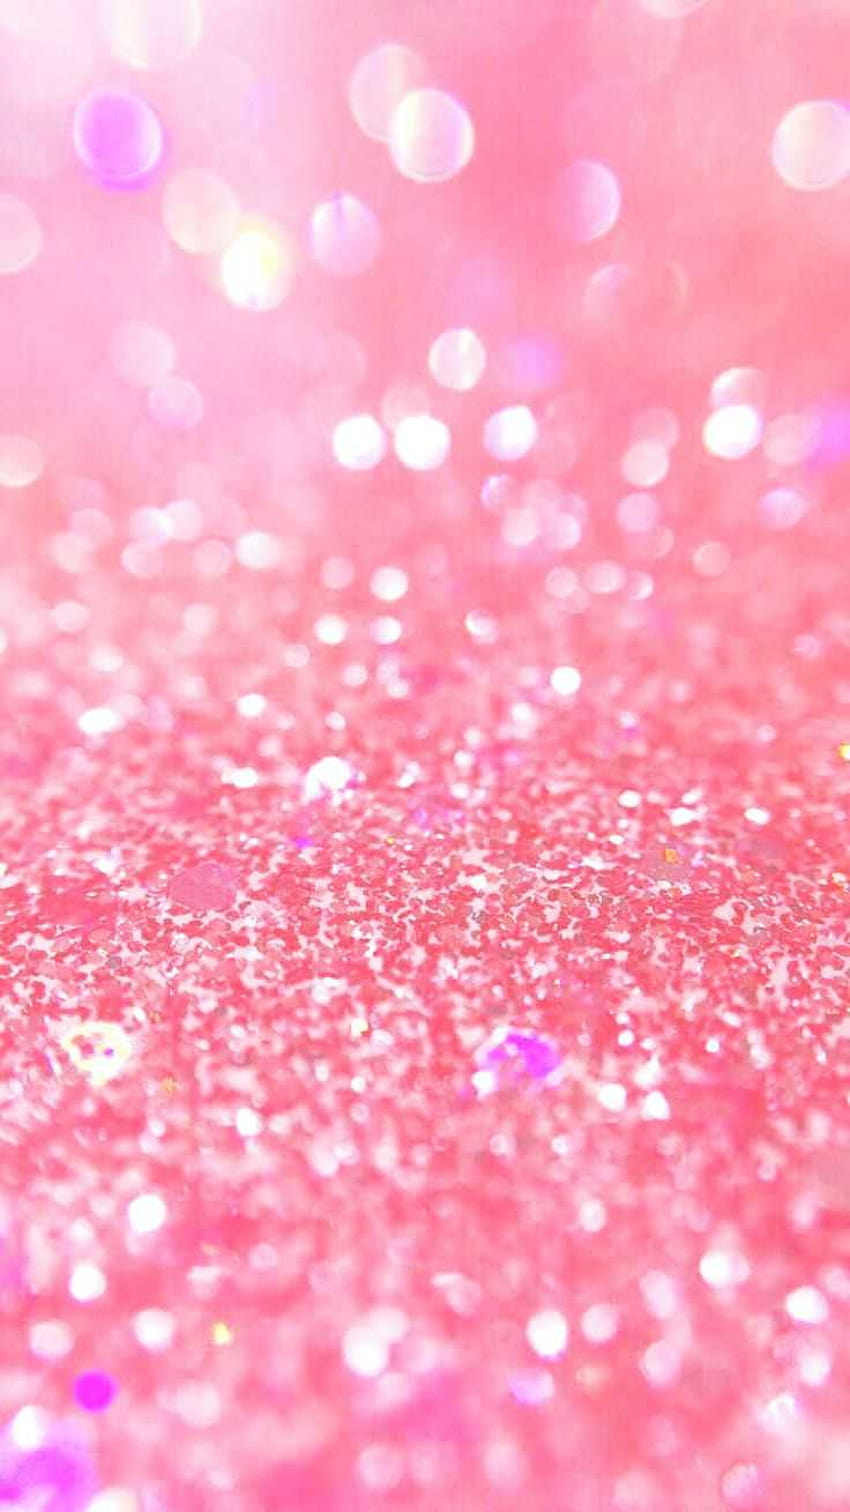 Pink Glitter Pics Of Mobile Phones Best Ideas About, best pink for phone วอลล์เปเปอร์โทรศัพท์ HD